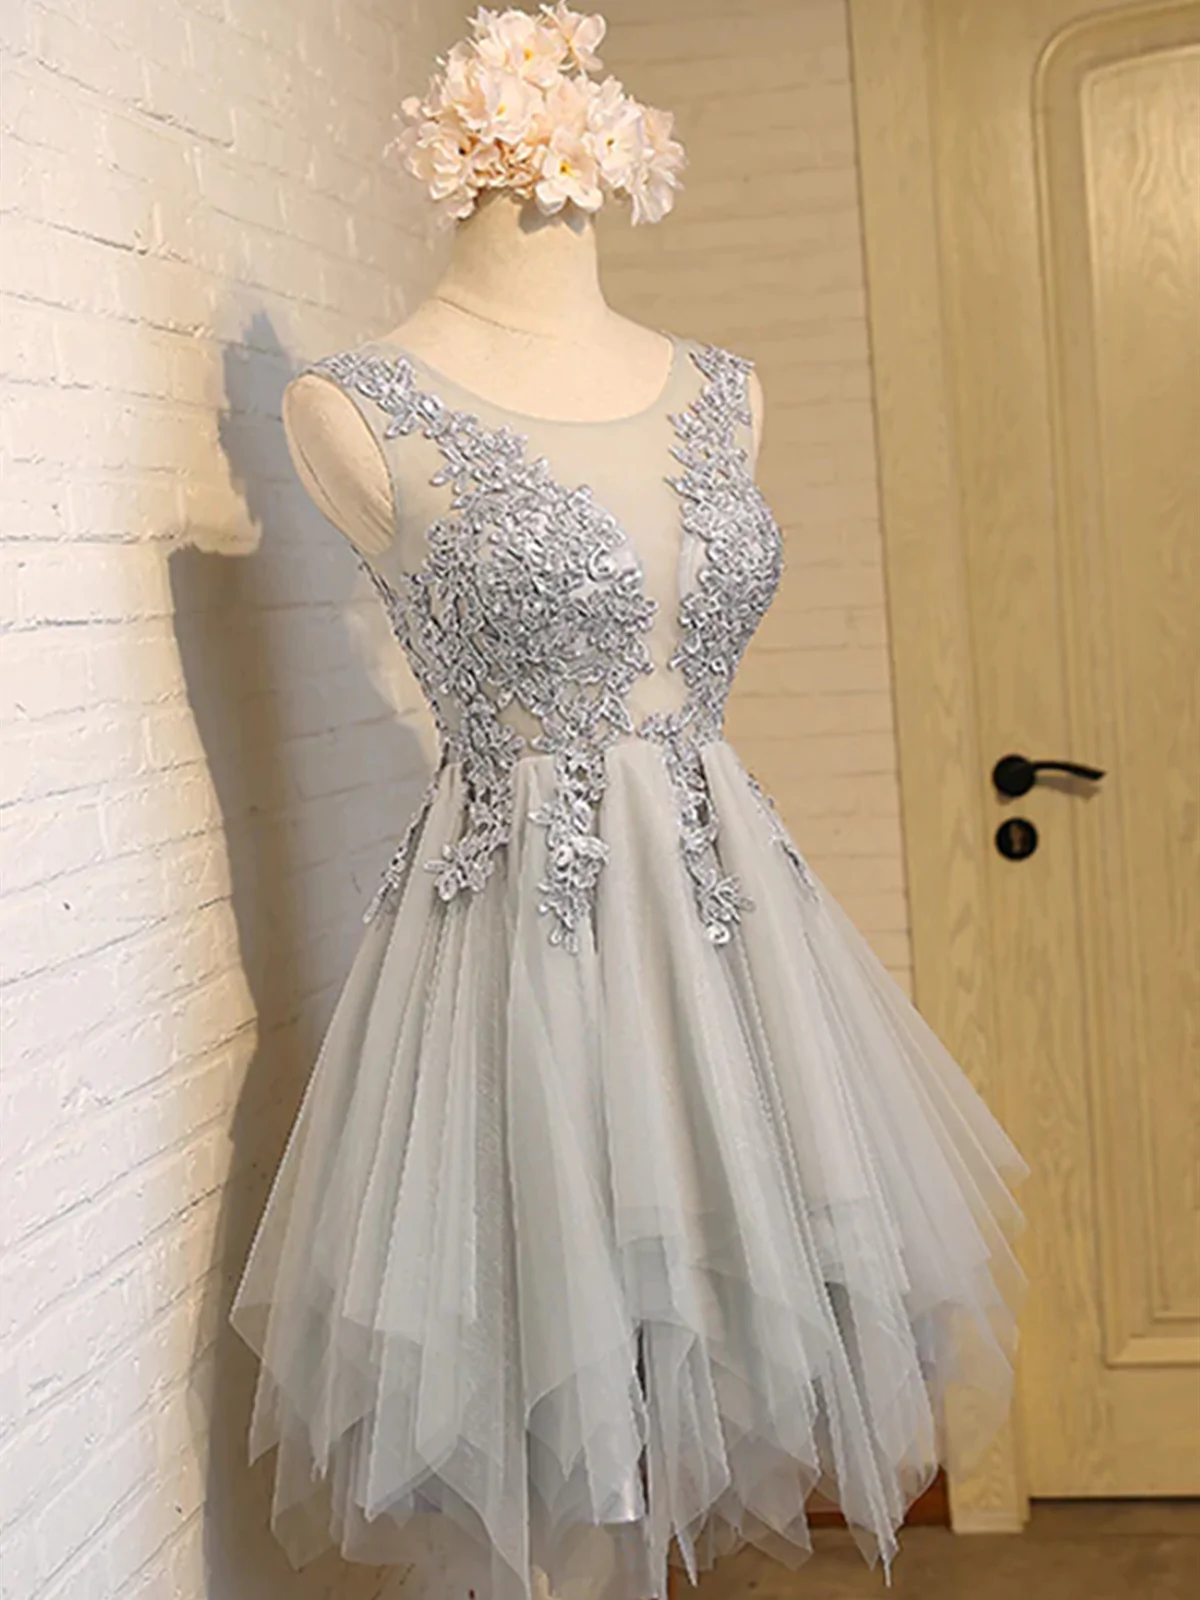 Round Neck Short Gray Lace Prom Dresses, Short Grey Lace Homecoming Dresses